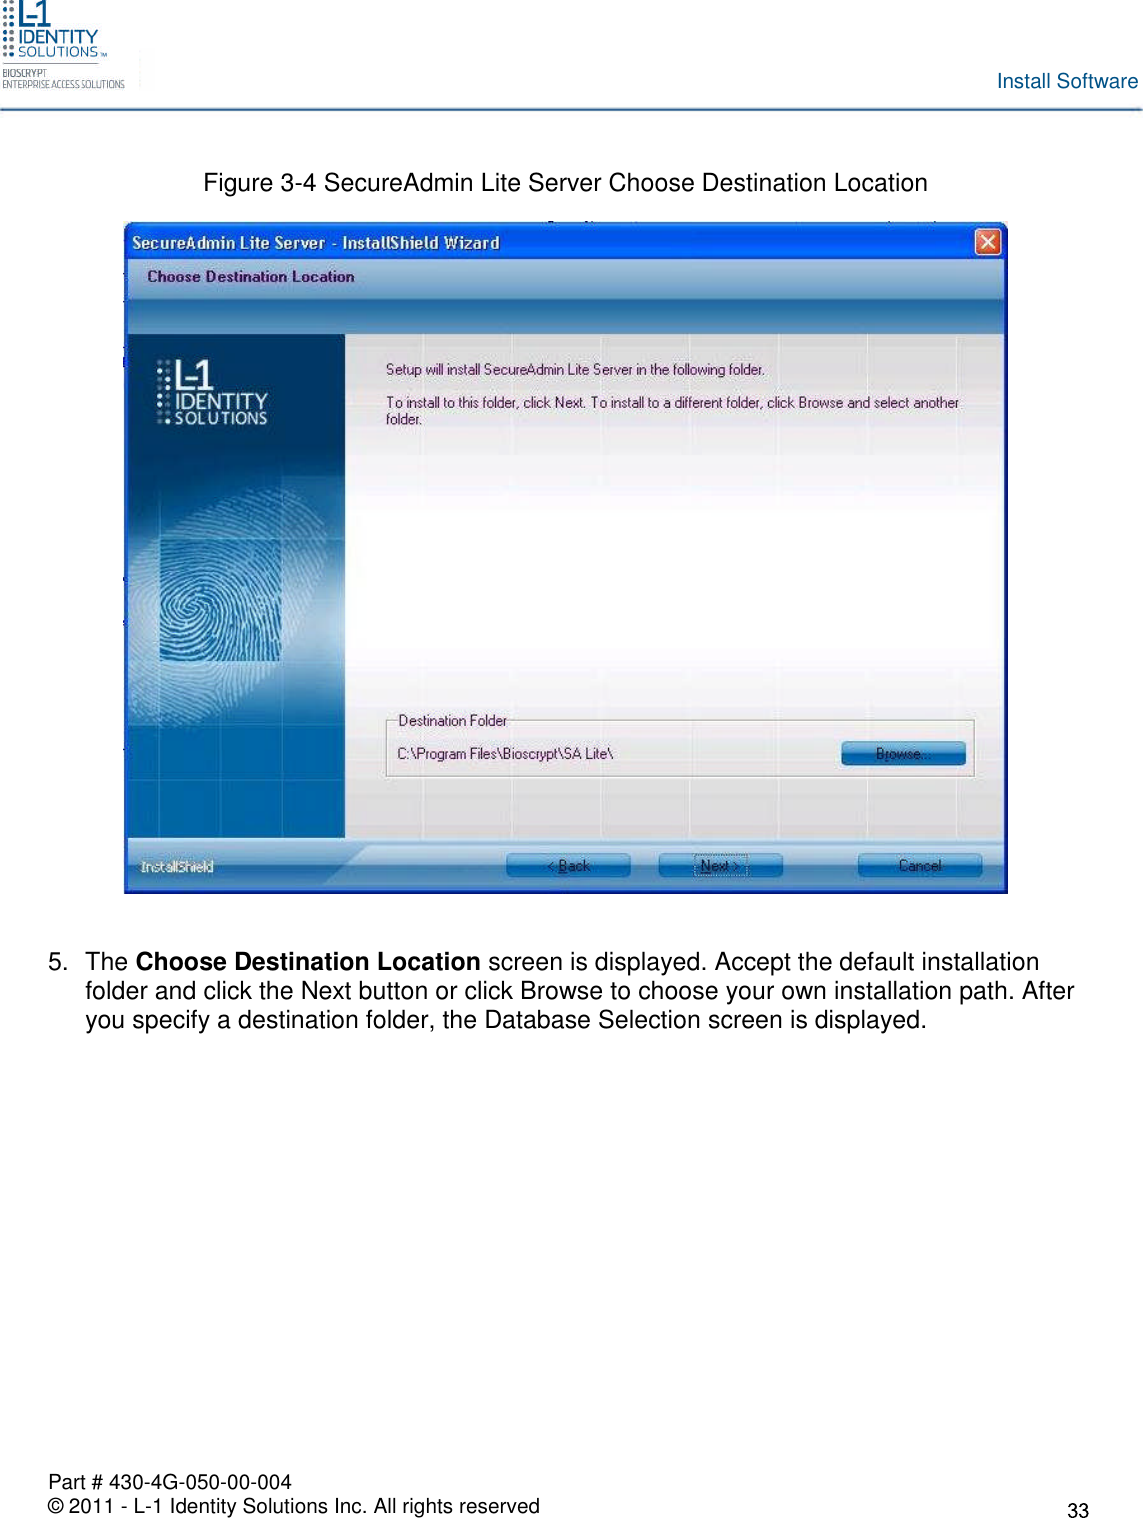 Part # 430-4G-050-00-004© 2011 - L-1 Identity Solutions Inc. All rights reservedInstall SoftwareFigure 3-4 SecureAdmin Lite Server Choose Destination Location5. The Choose Destination Location screen is displayed. Accept the default installationfolder and click the Next button or click Browse to choose your own installation path. Afteryou specify a destination folder, the Database Selection screen is displayed.